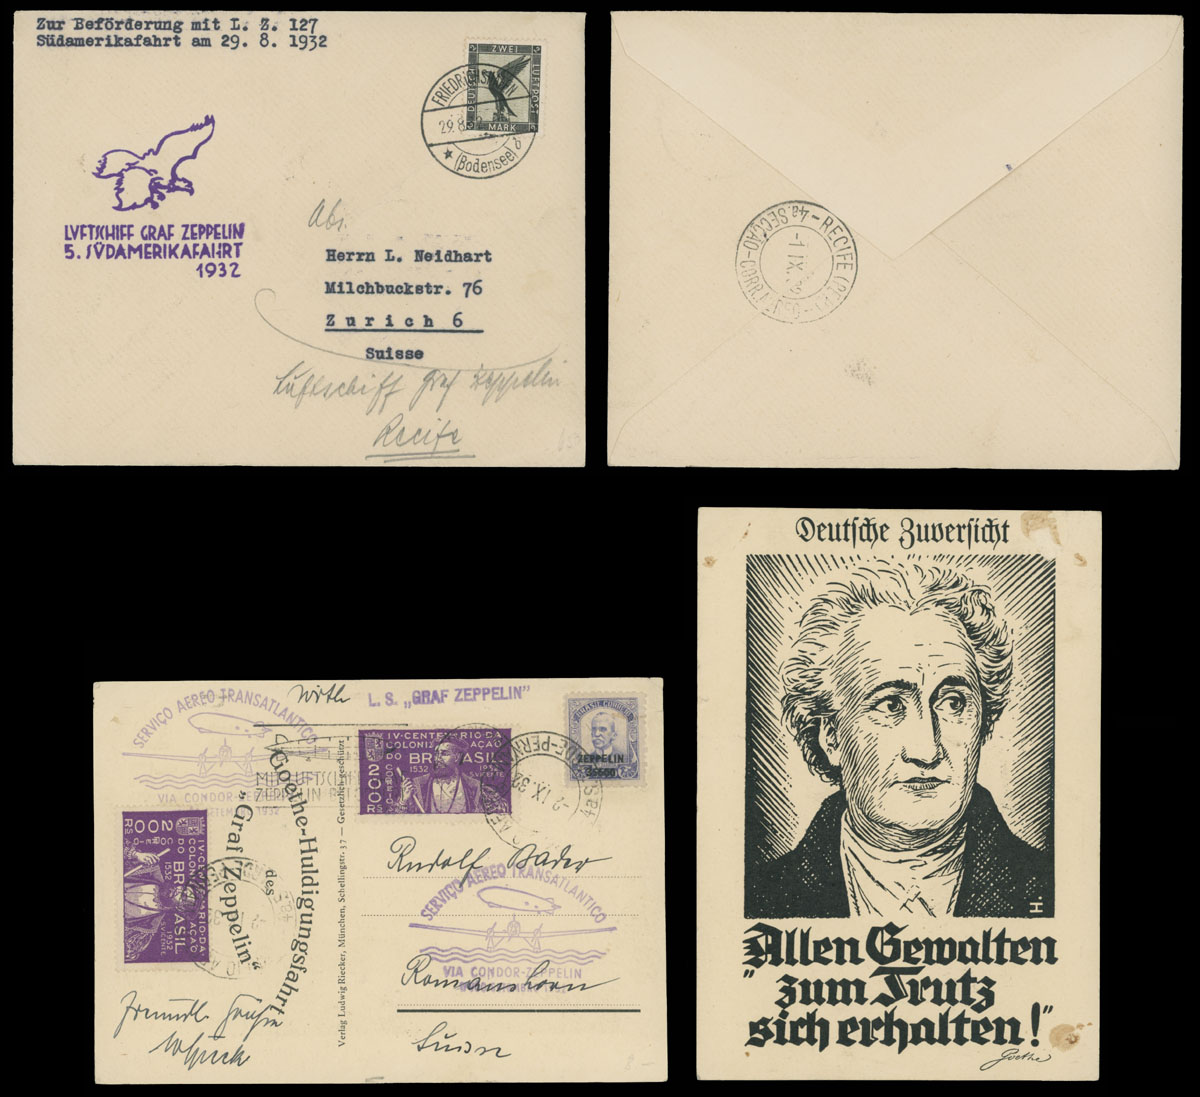 Lot 56 - 1. Worldwide Air Post Stamps and Postal History germany -  Raritan Stamps Inc. Auction #95 Worldwide Air Post Stamps and Philatelic Rarities of the World